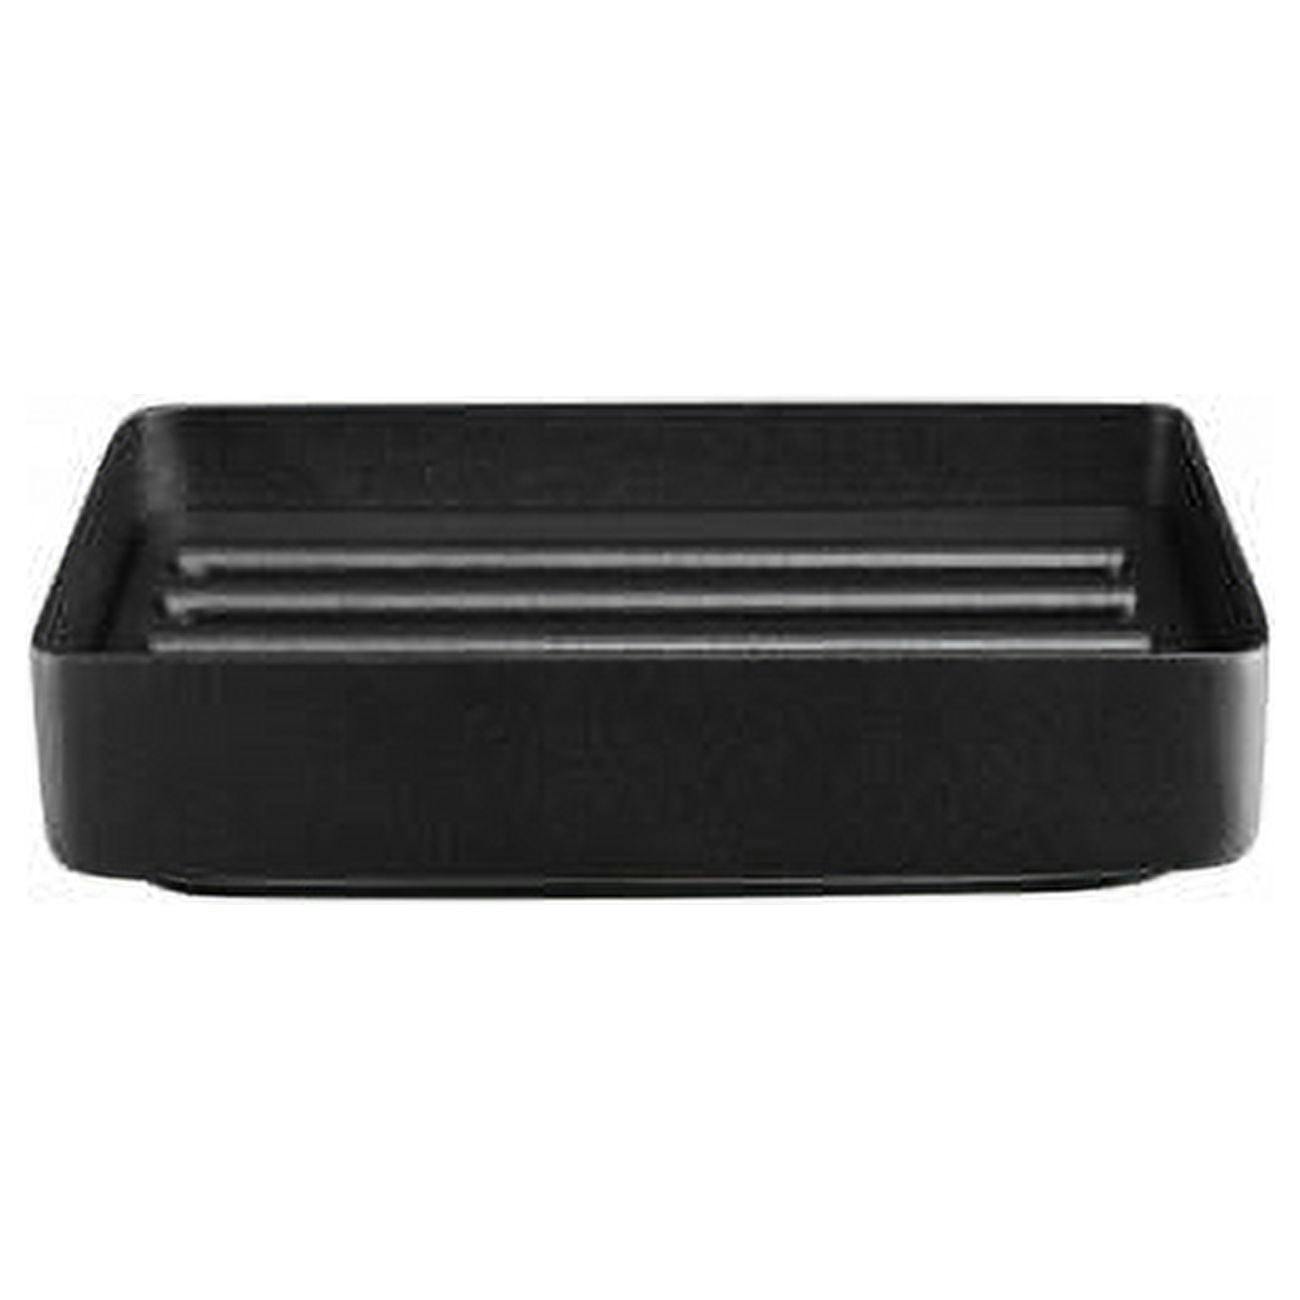 Nexio Quick-Dry Slatted Black Stainless Steel Soap Dish